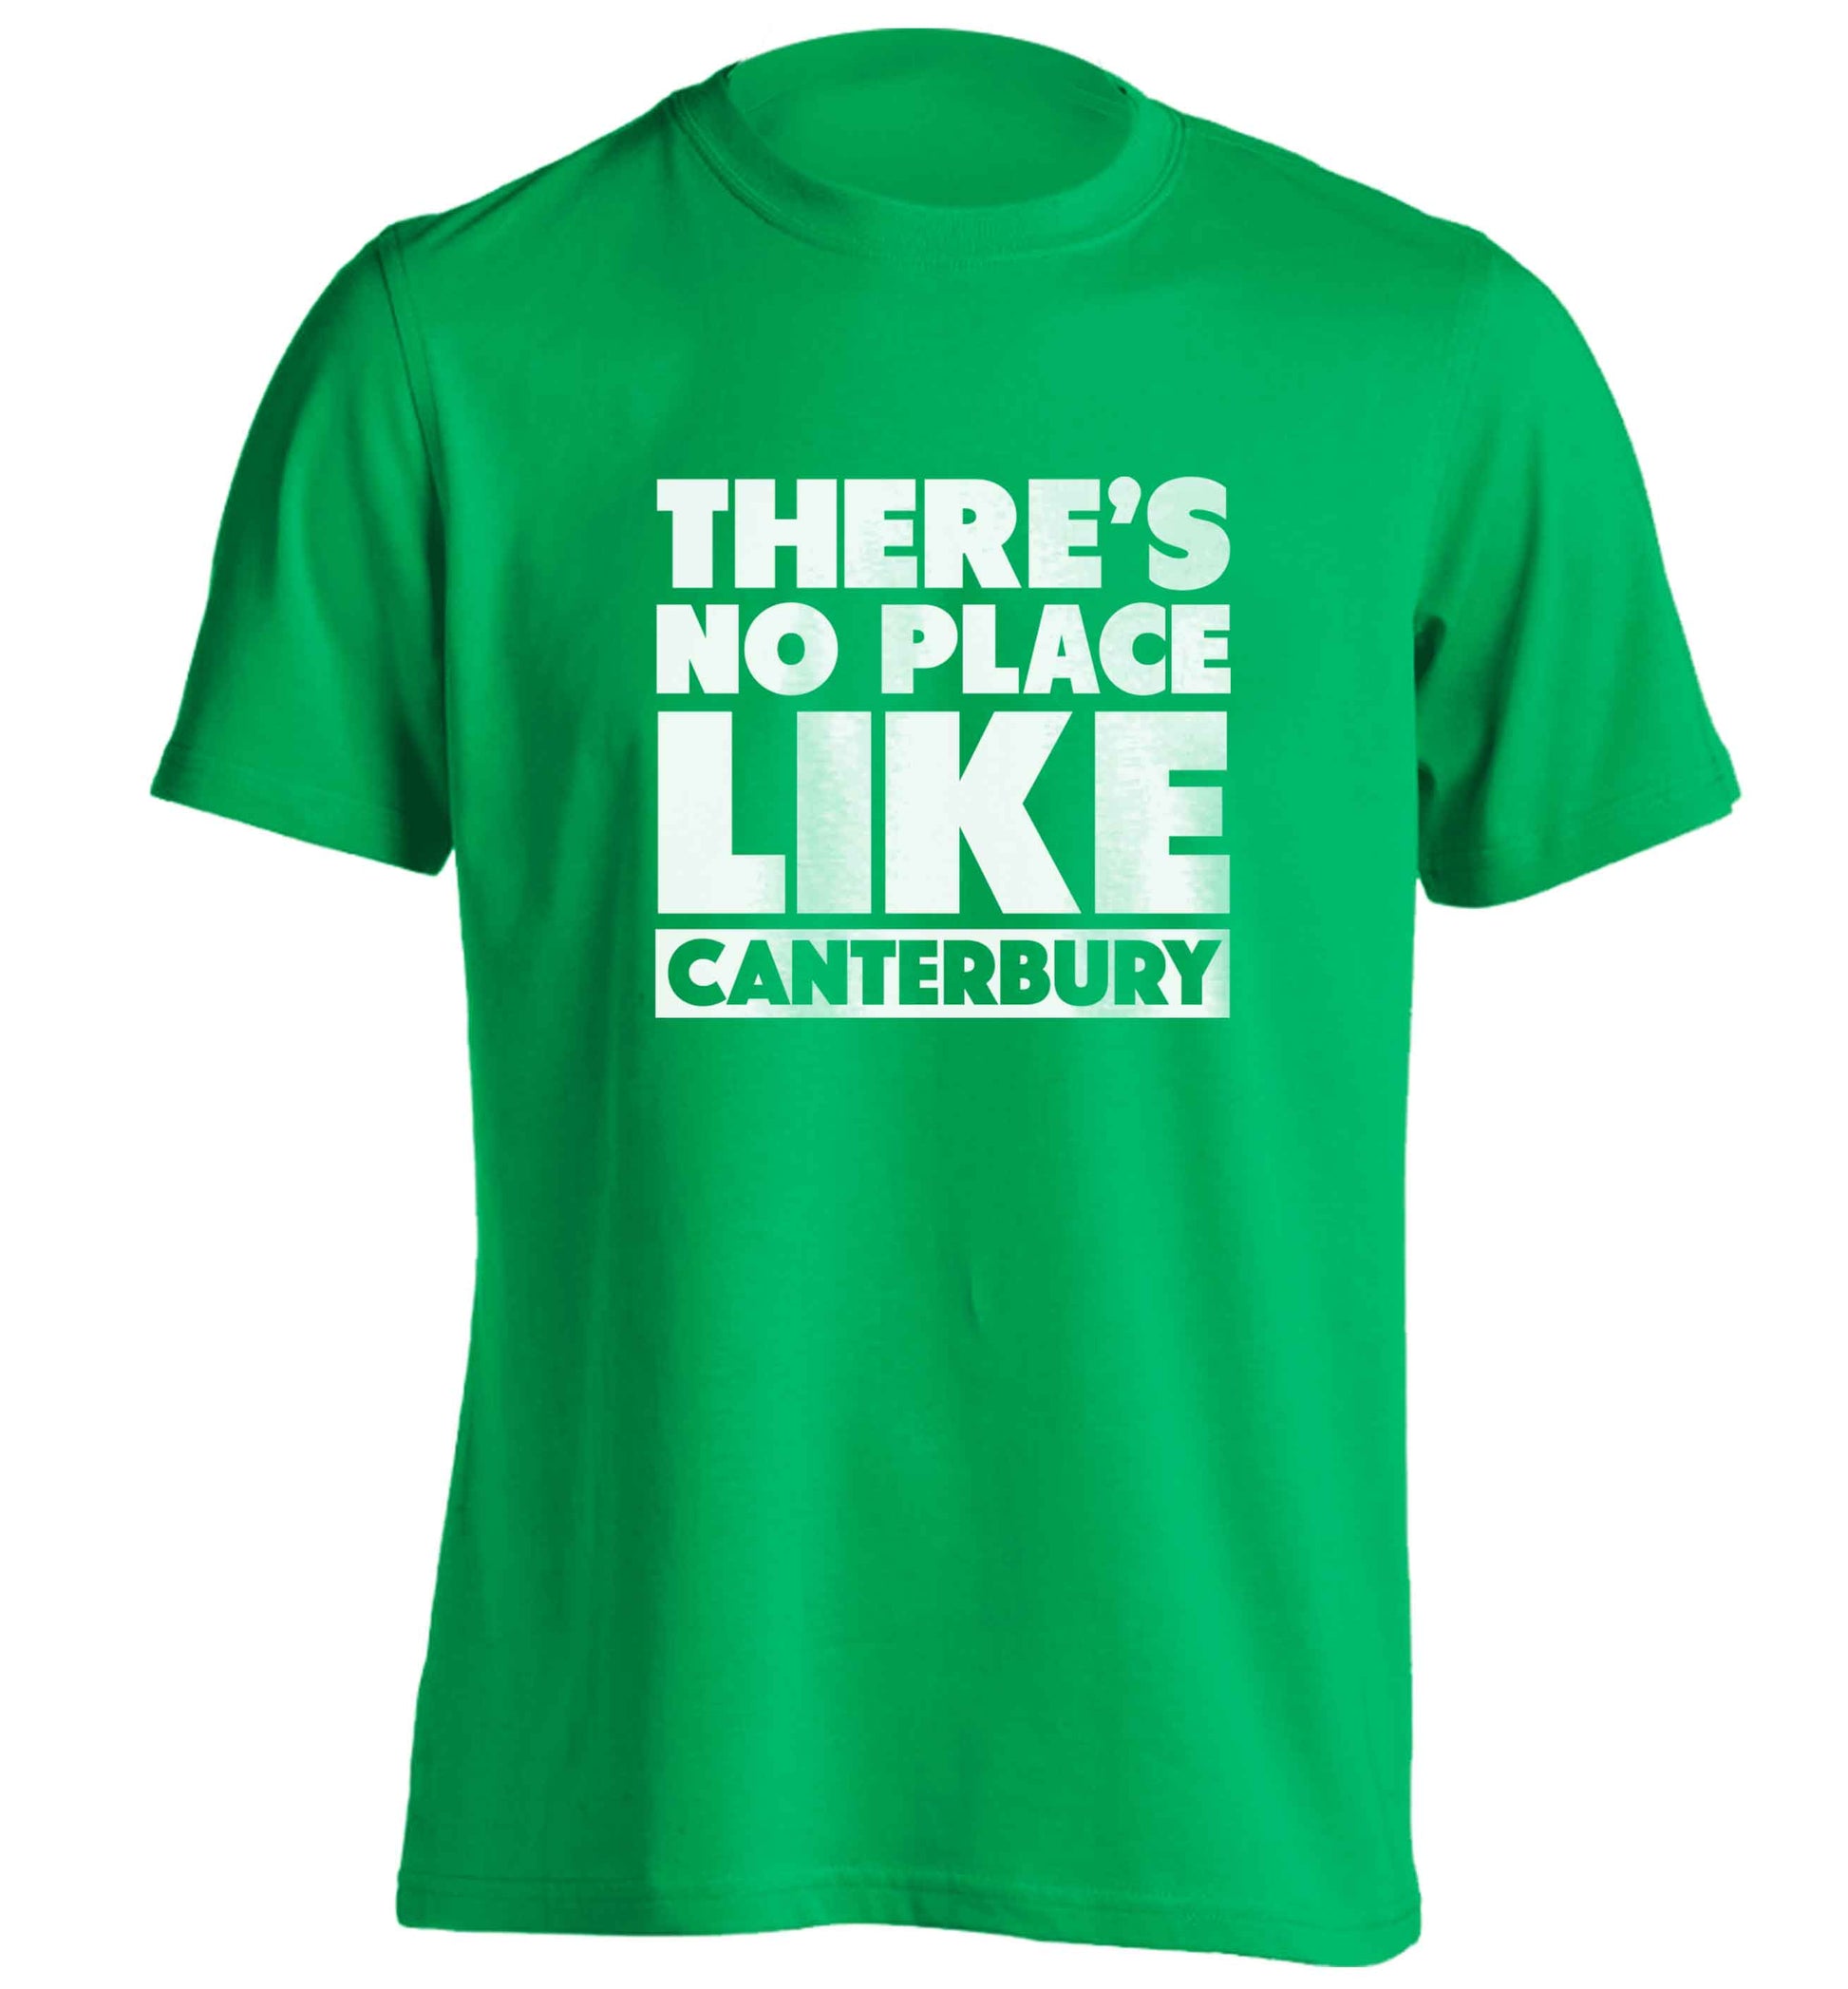 There's no place like Canterbury adults unisex green Tshirt 2XL